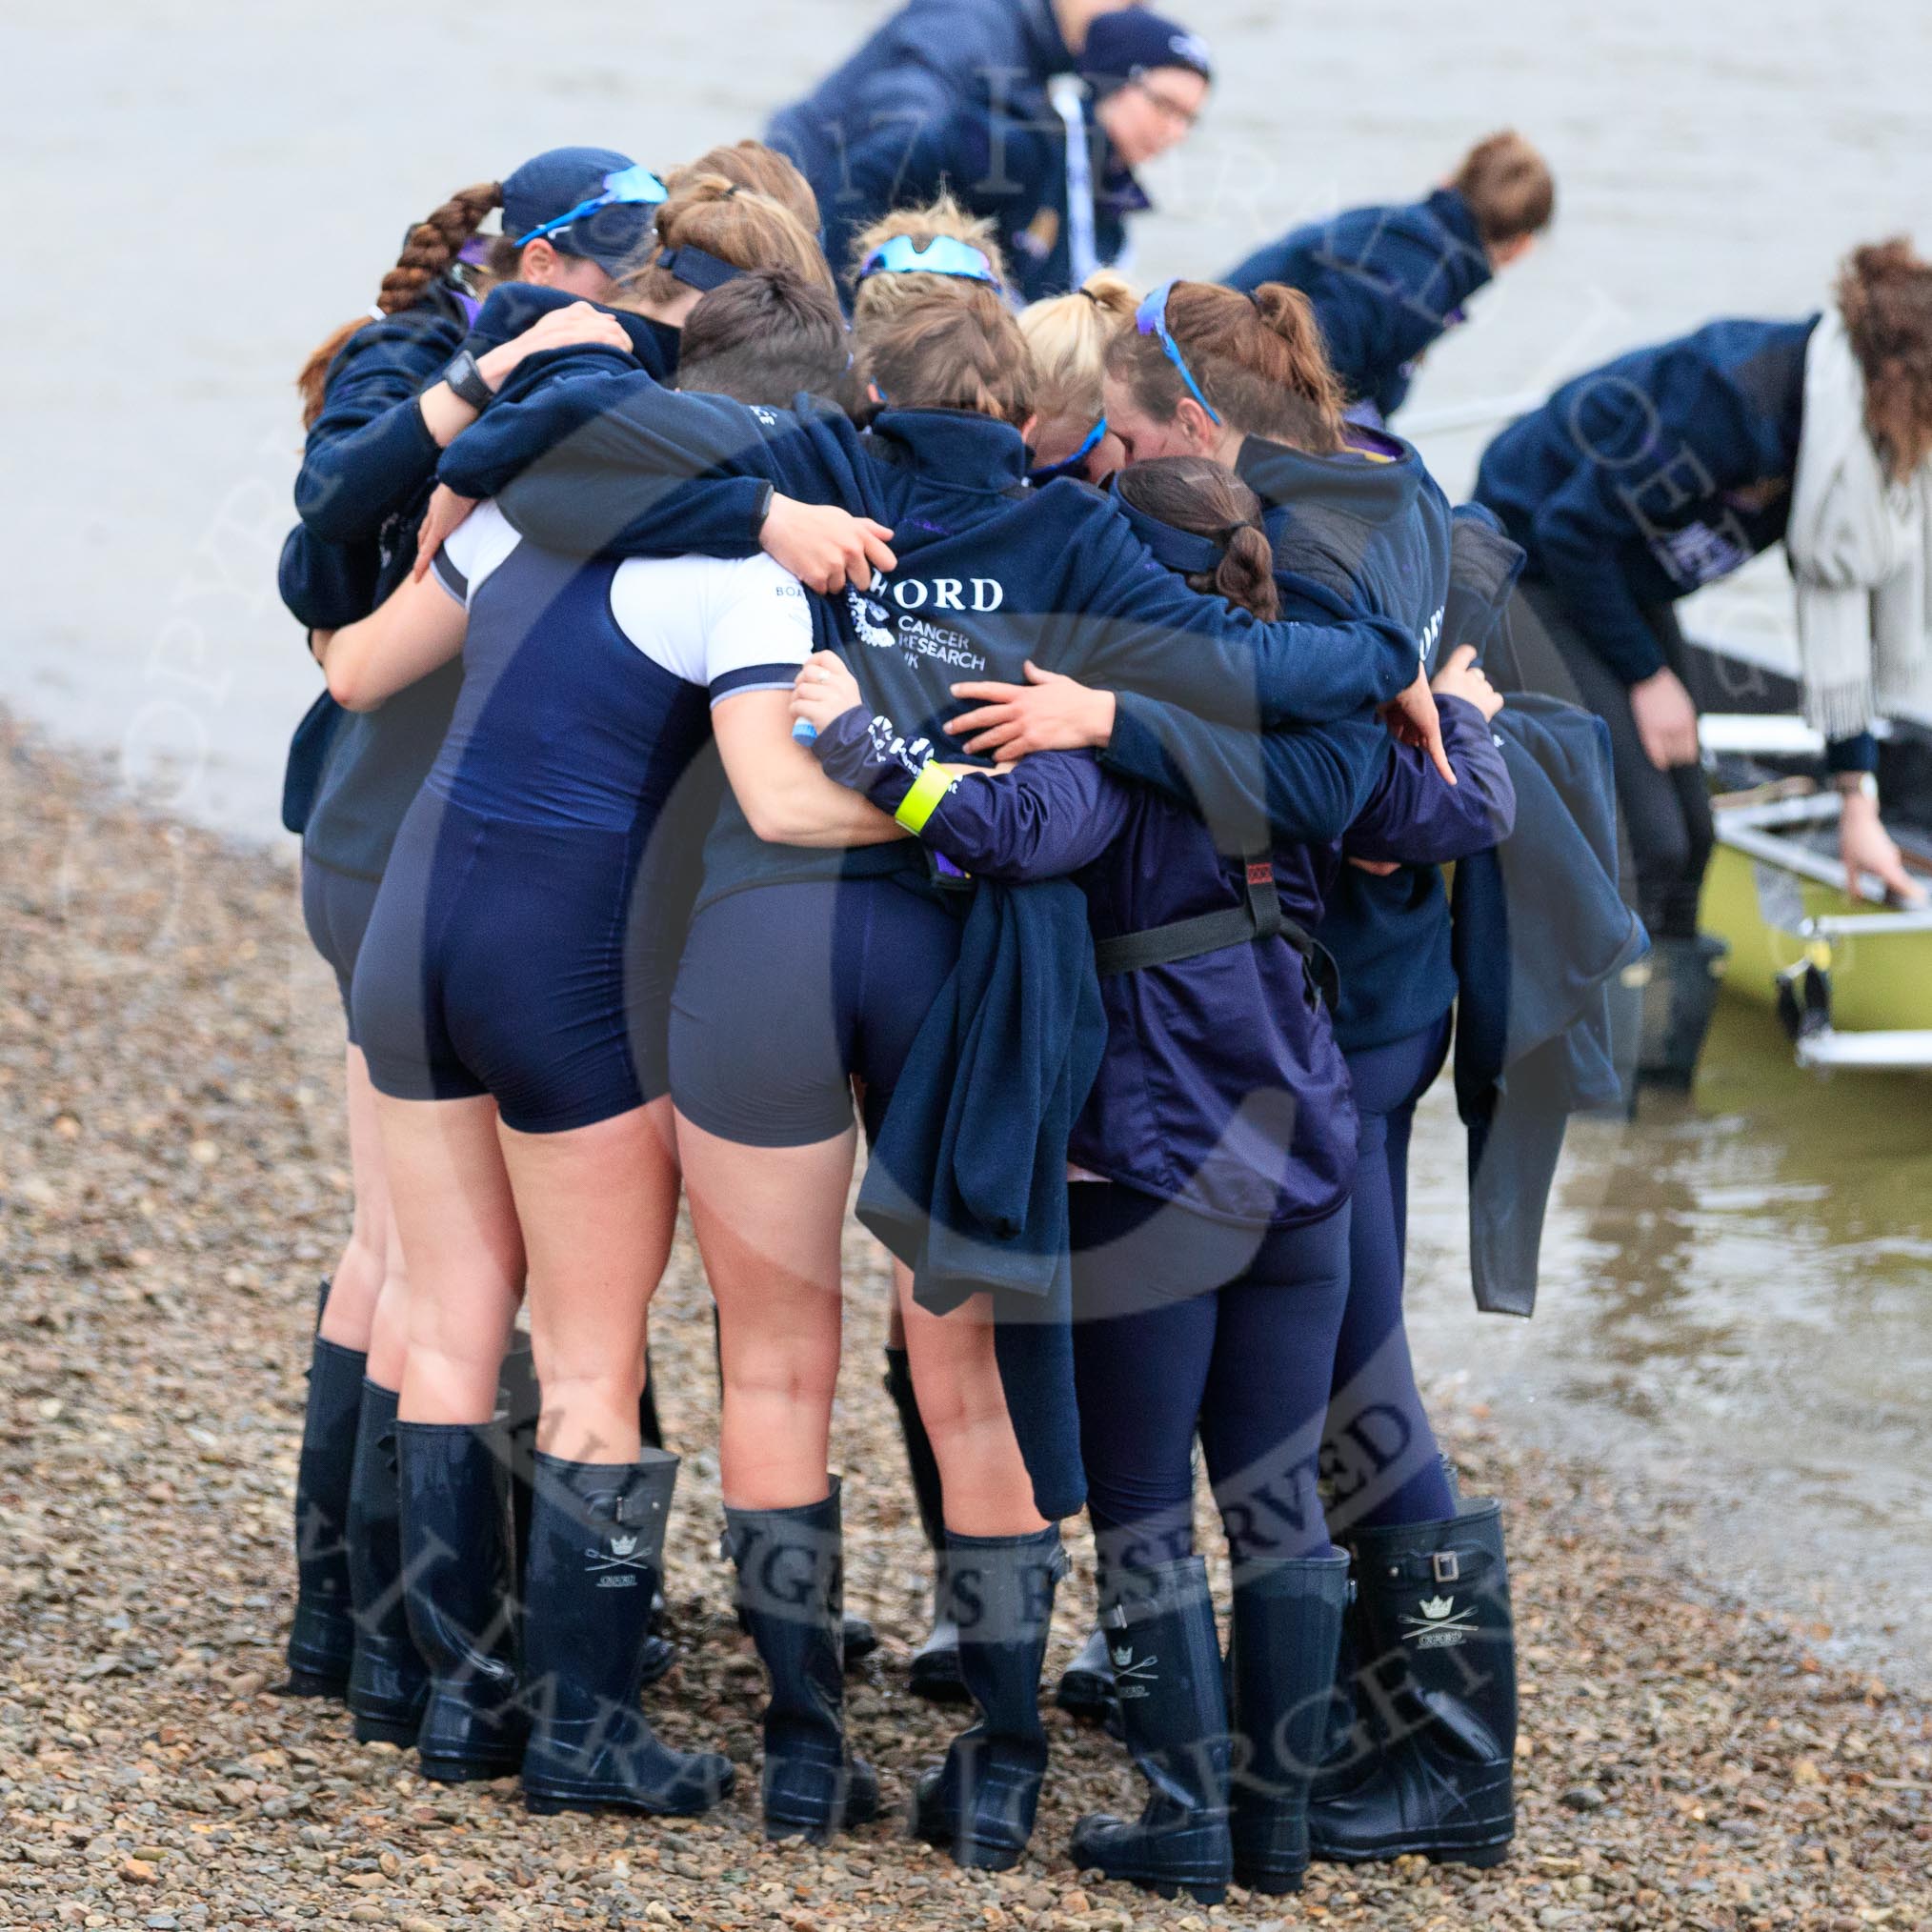 The Cancer Research UK Women's Boat Race 2018: The Oxford women, arriving second, huddled together after the race.
River Thames between Putney Bridge and Mortlake,
London SW15,

United Kingdom,
on 24 March 2018 at 16:58, image #228